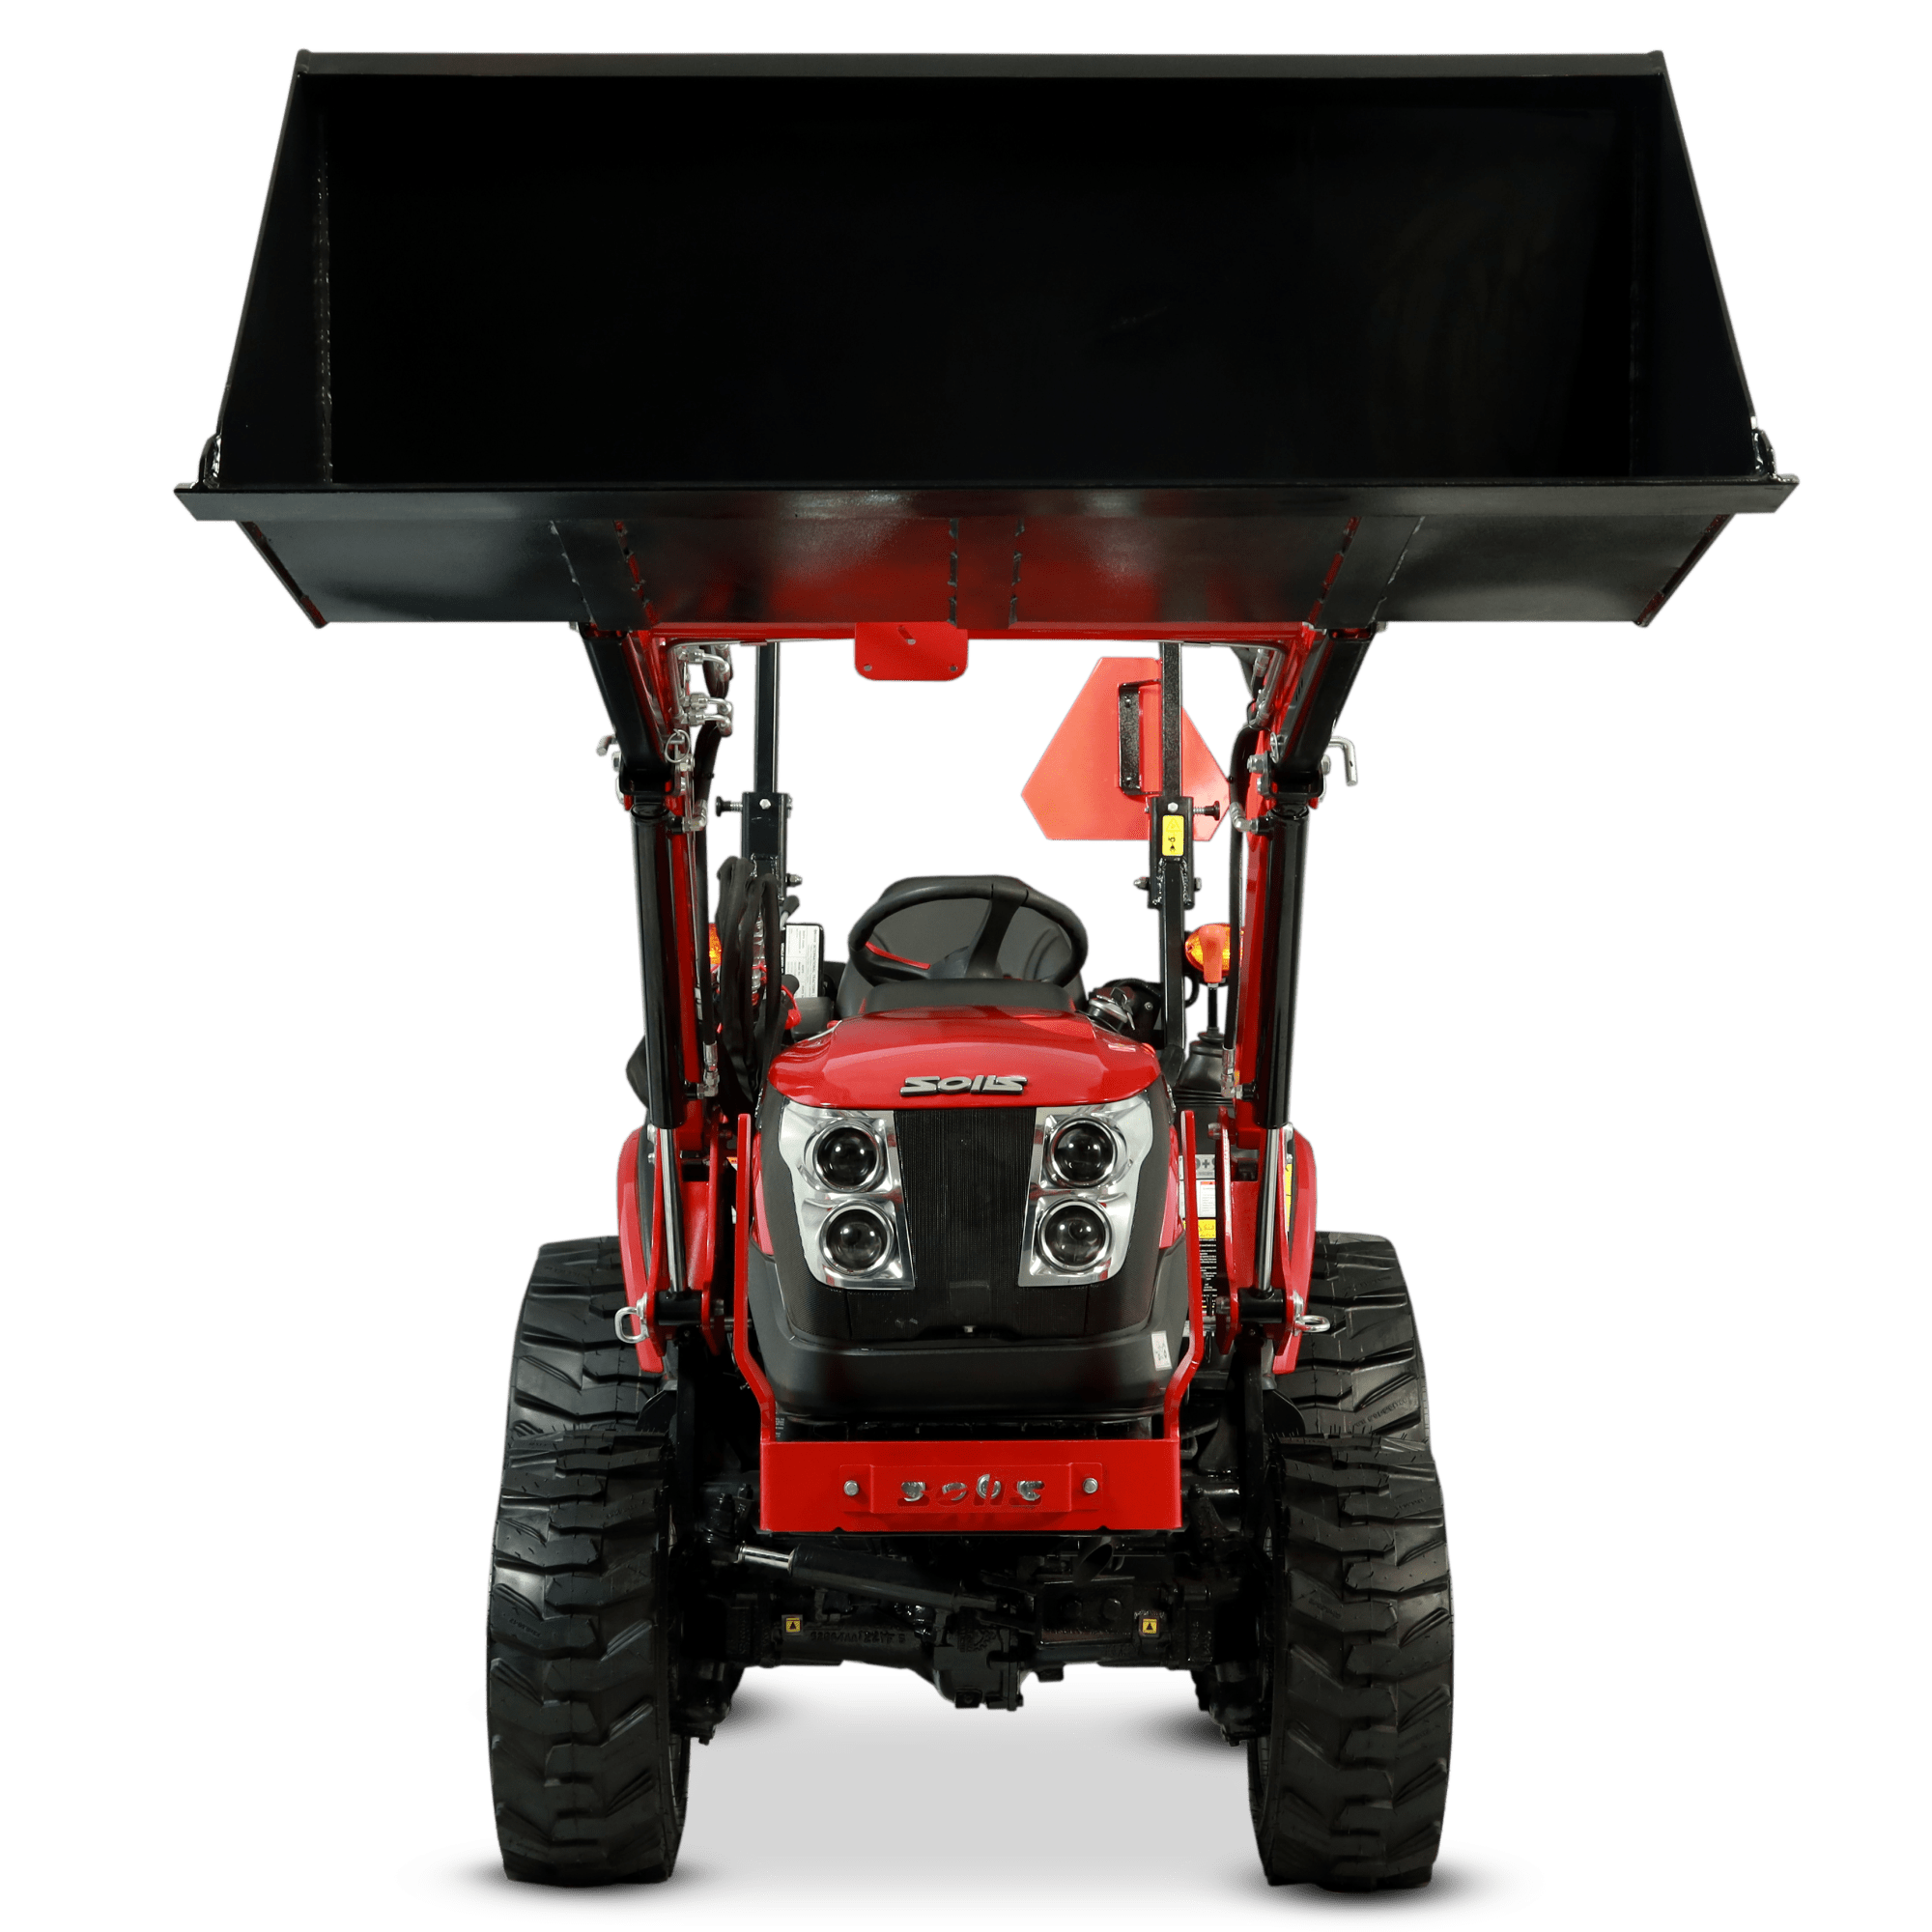 Solis S24 shuttle XL tractor